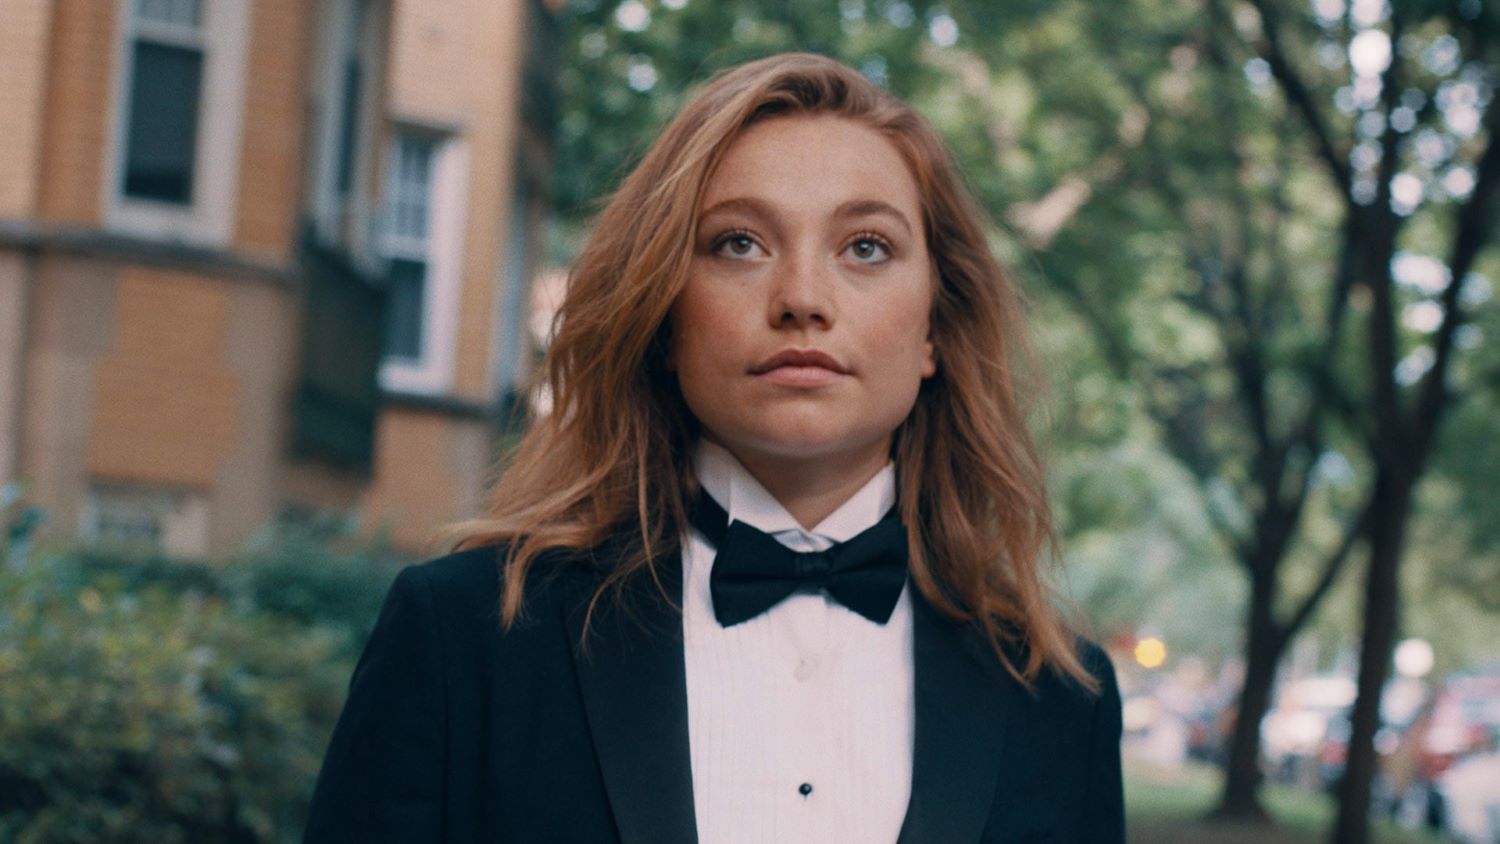 Cyd stands on a city block in front of a tree. She's a young woman with long brown hair wearing a tuxedo. 